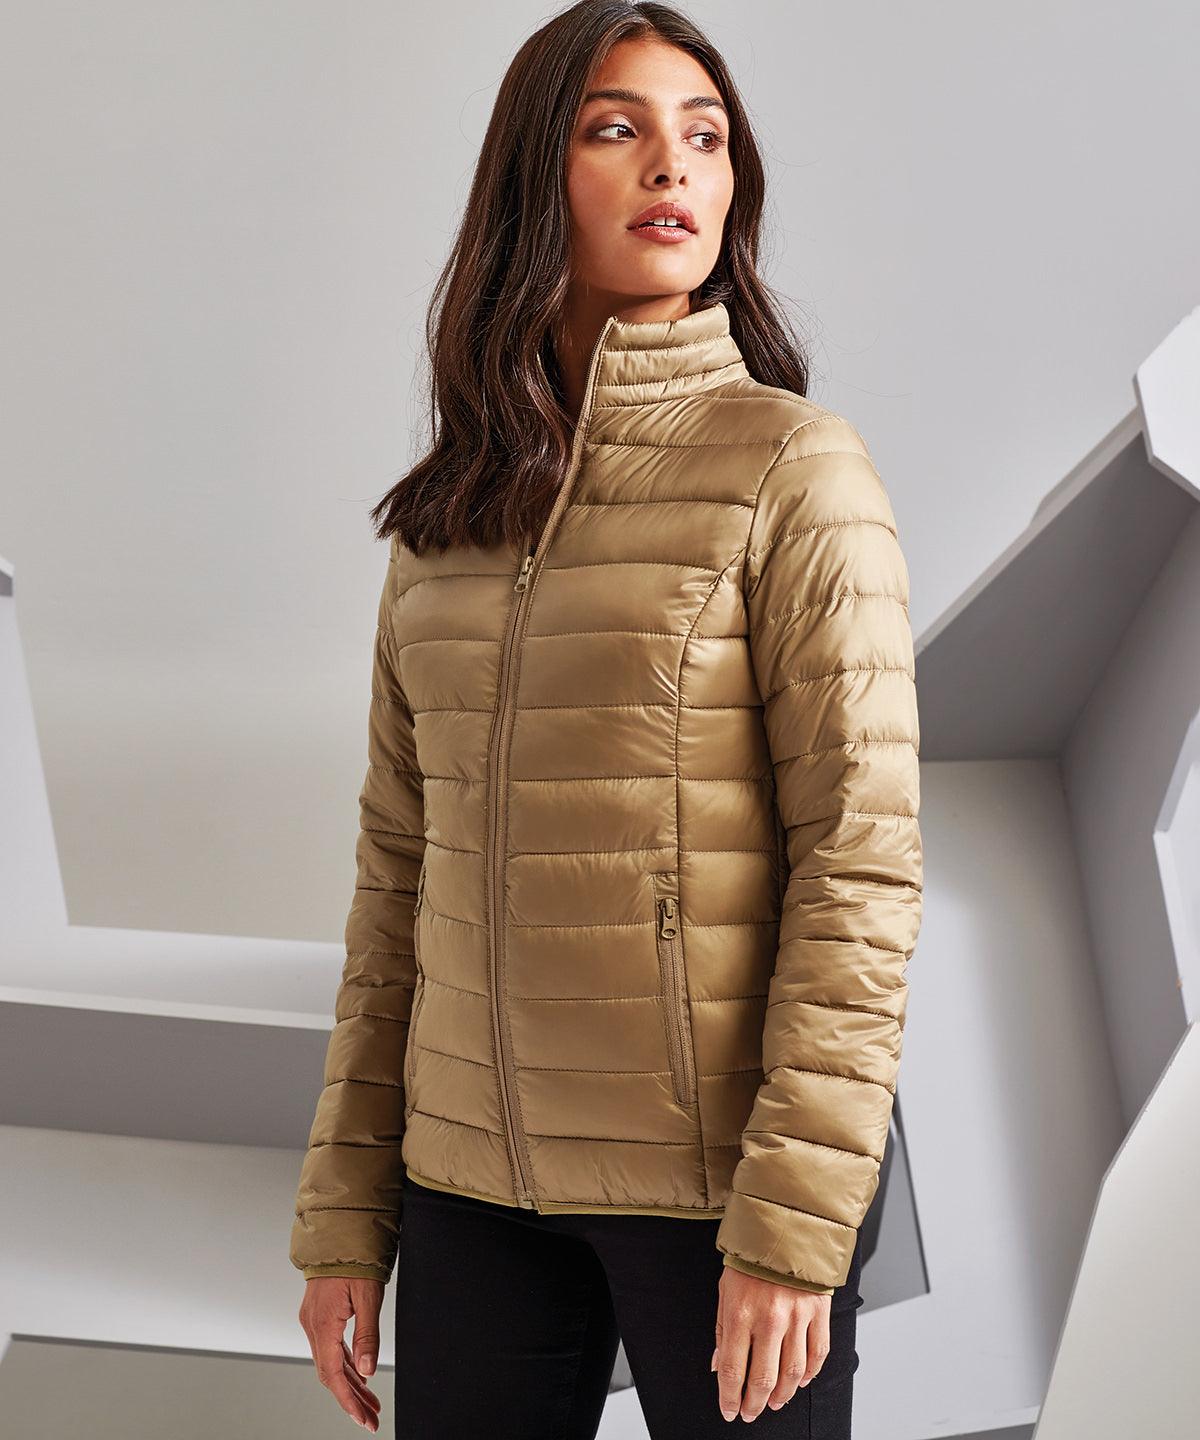 Royal - Women's terrain padded jacket Jackets 2786 Jackets & Coats, Must Haves, Padded & Insulation, Padded Perfection, Women's Fashion Schoolwear Centres